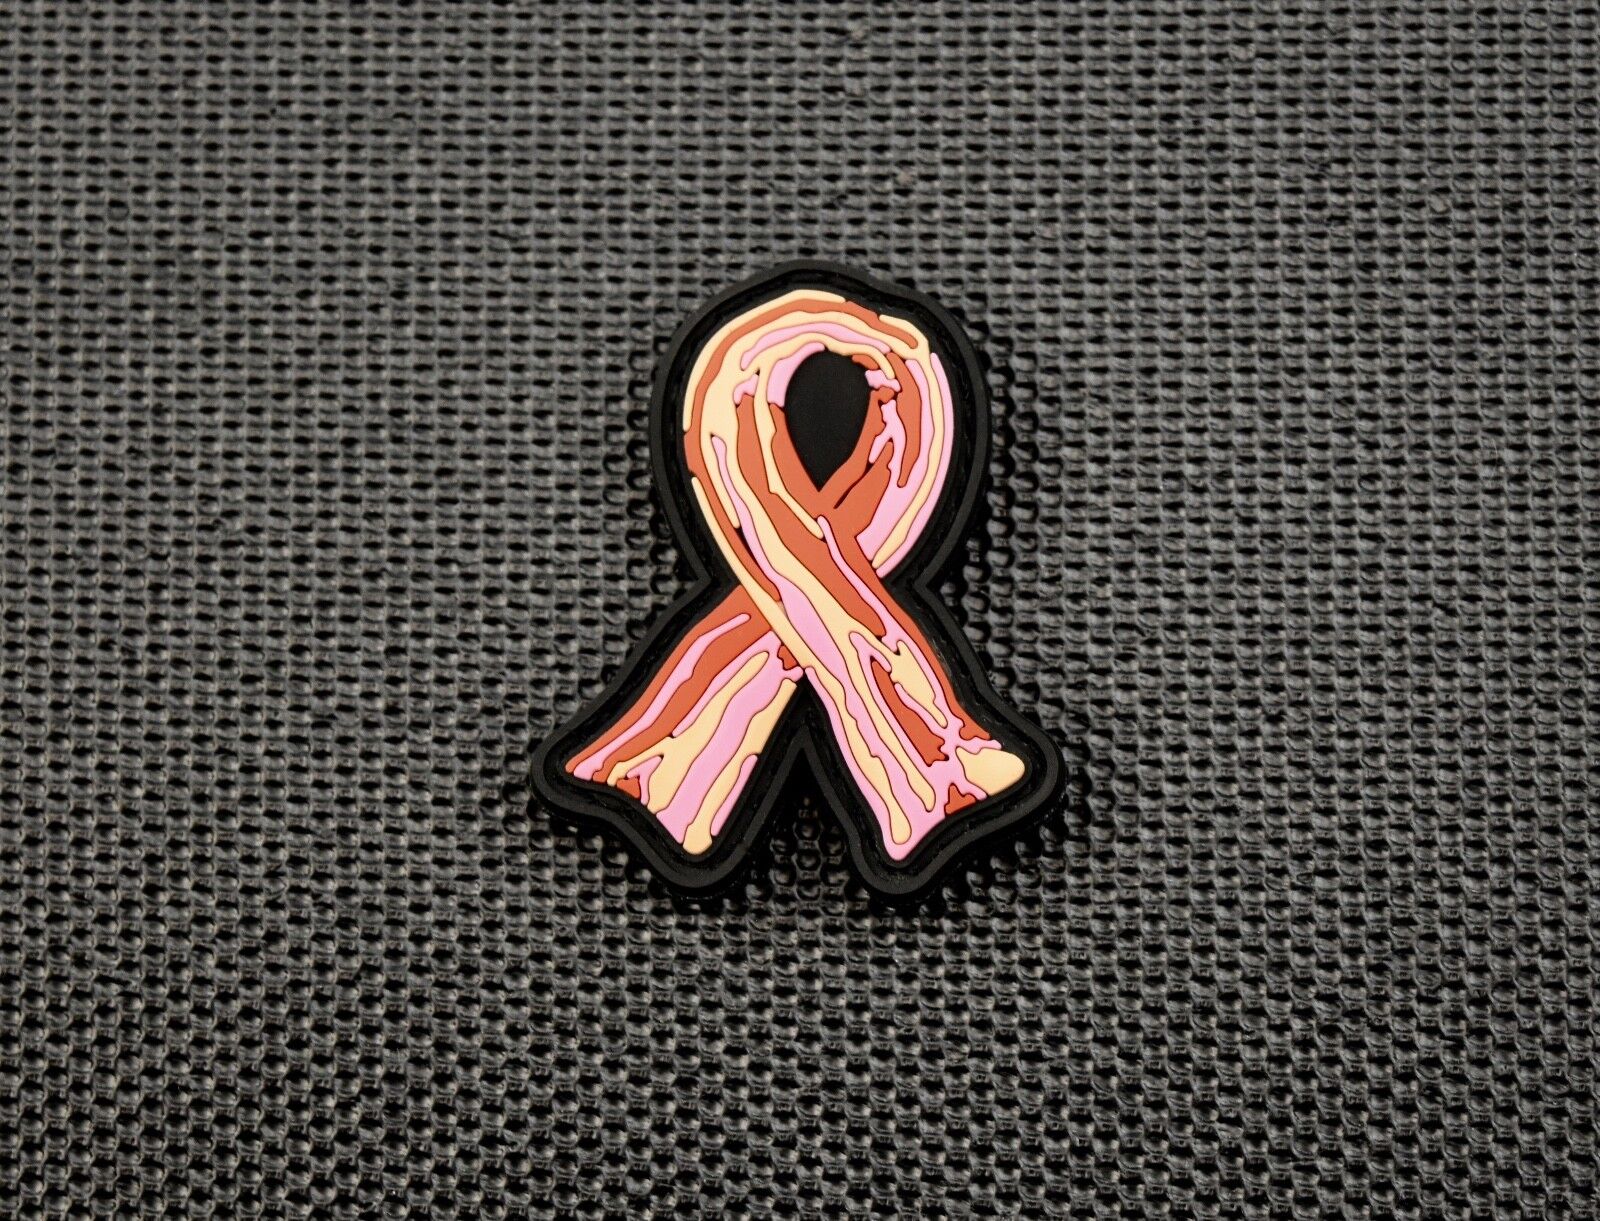 Bacon Awareness Ribbon 3D PVC Rubber Morale Patch Hook Backing 